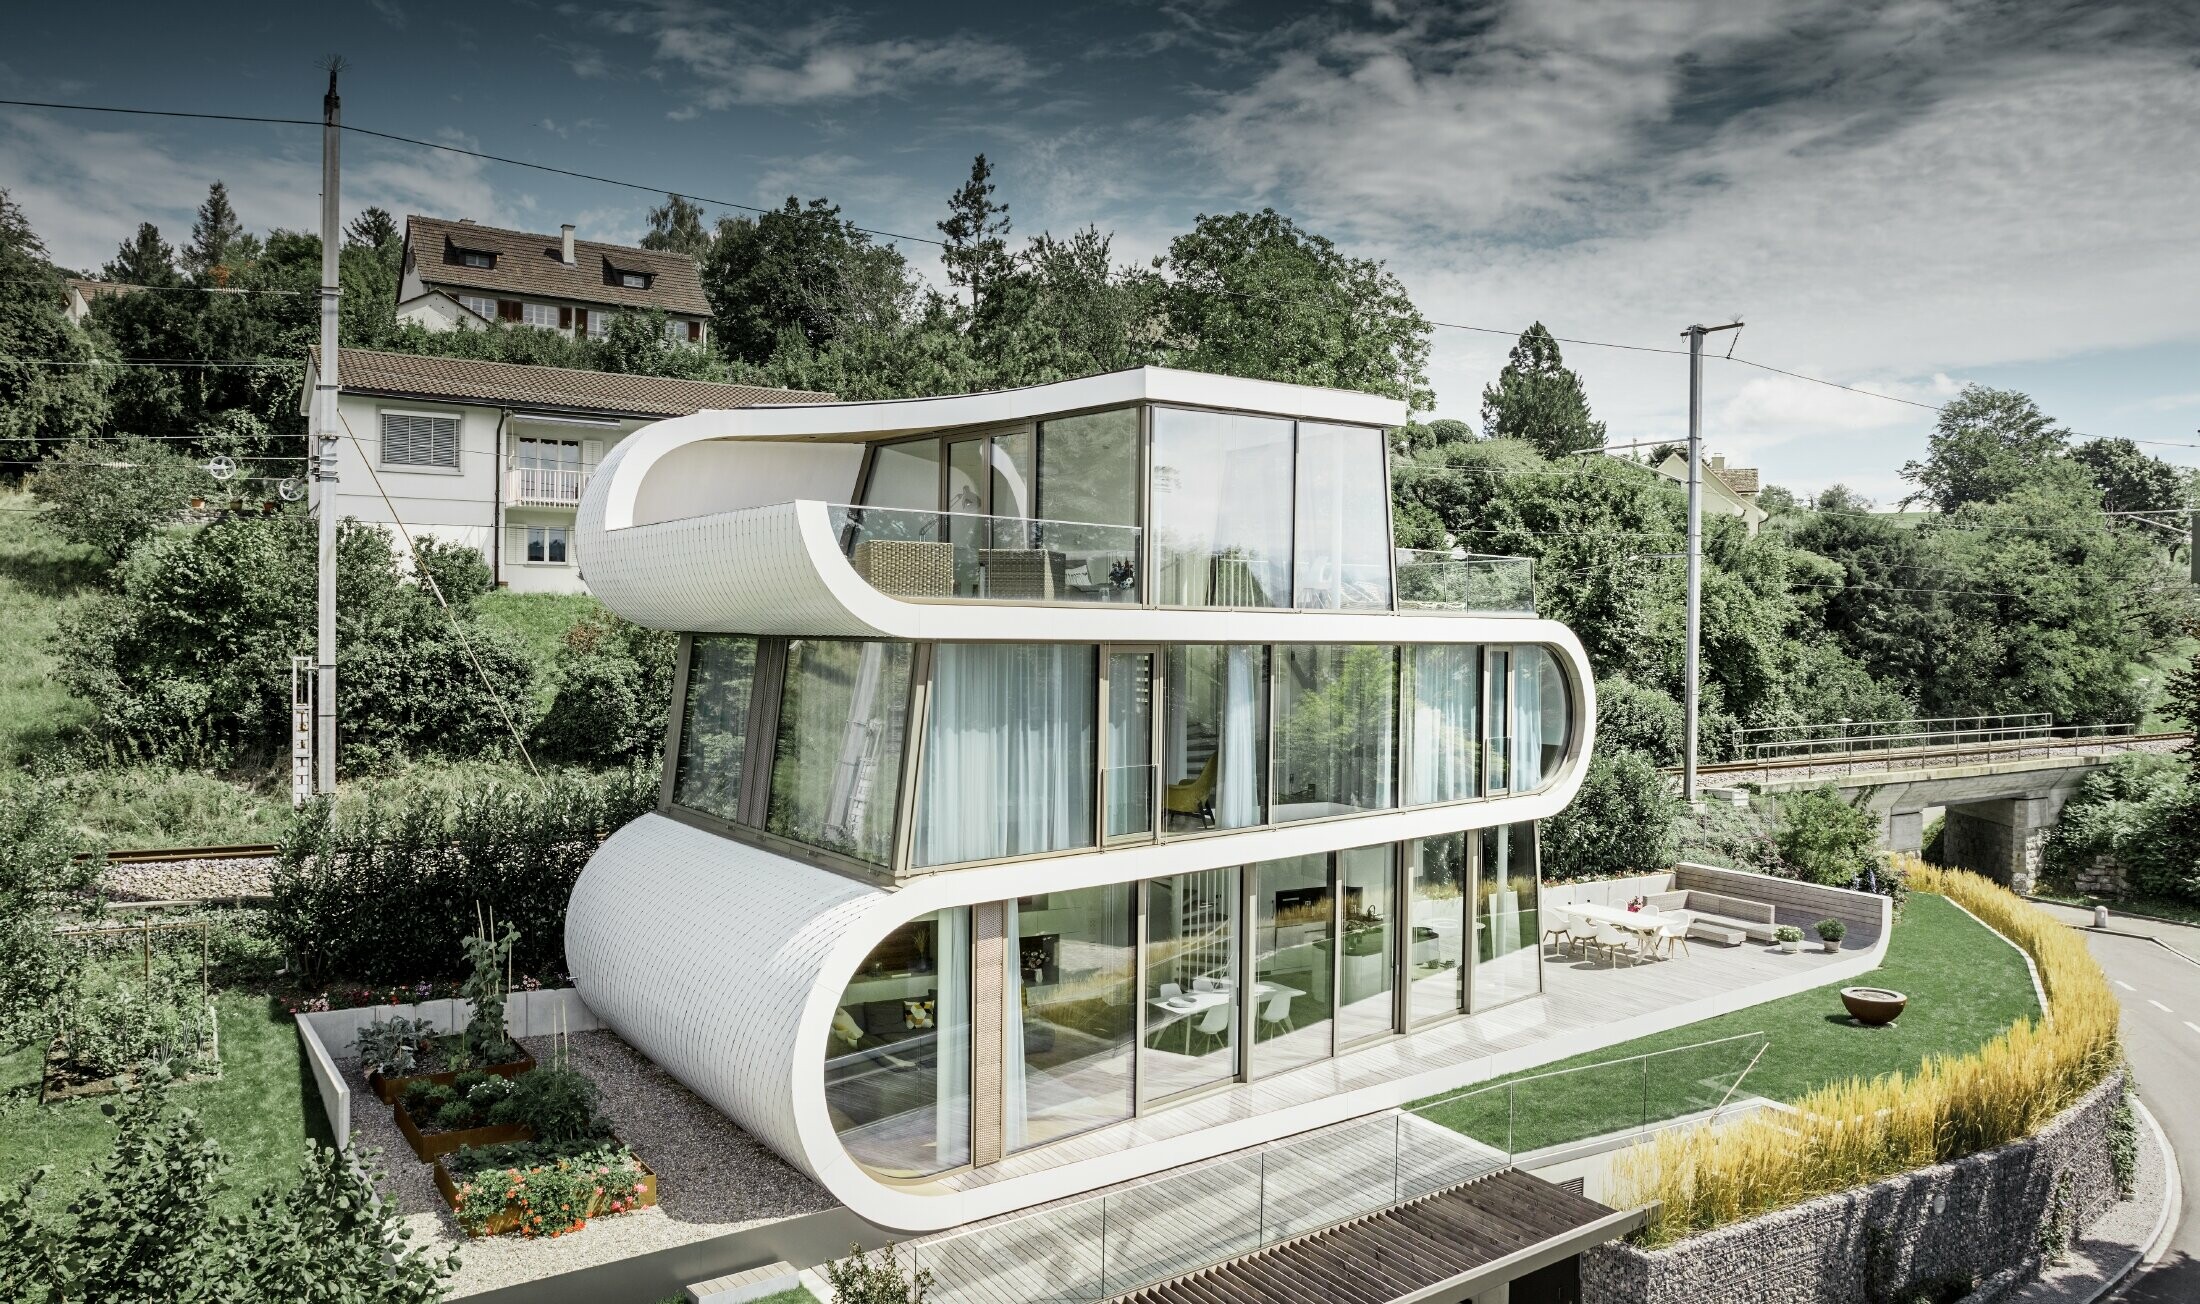 Ultra modern detached house designed by the architect Camenzind from Zurich. A curved truss connects the individual levels. The curves were clad in the PREFA small rhomboid roof tile in pure white. The house has numerous large glazed areas creating a very open effect.